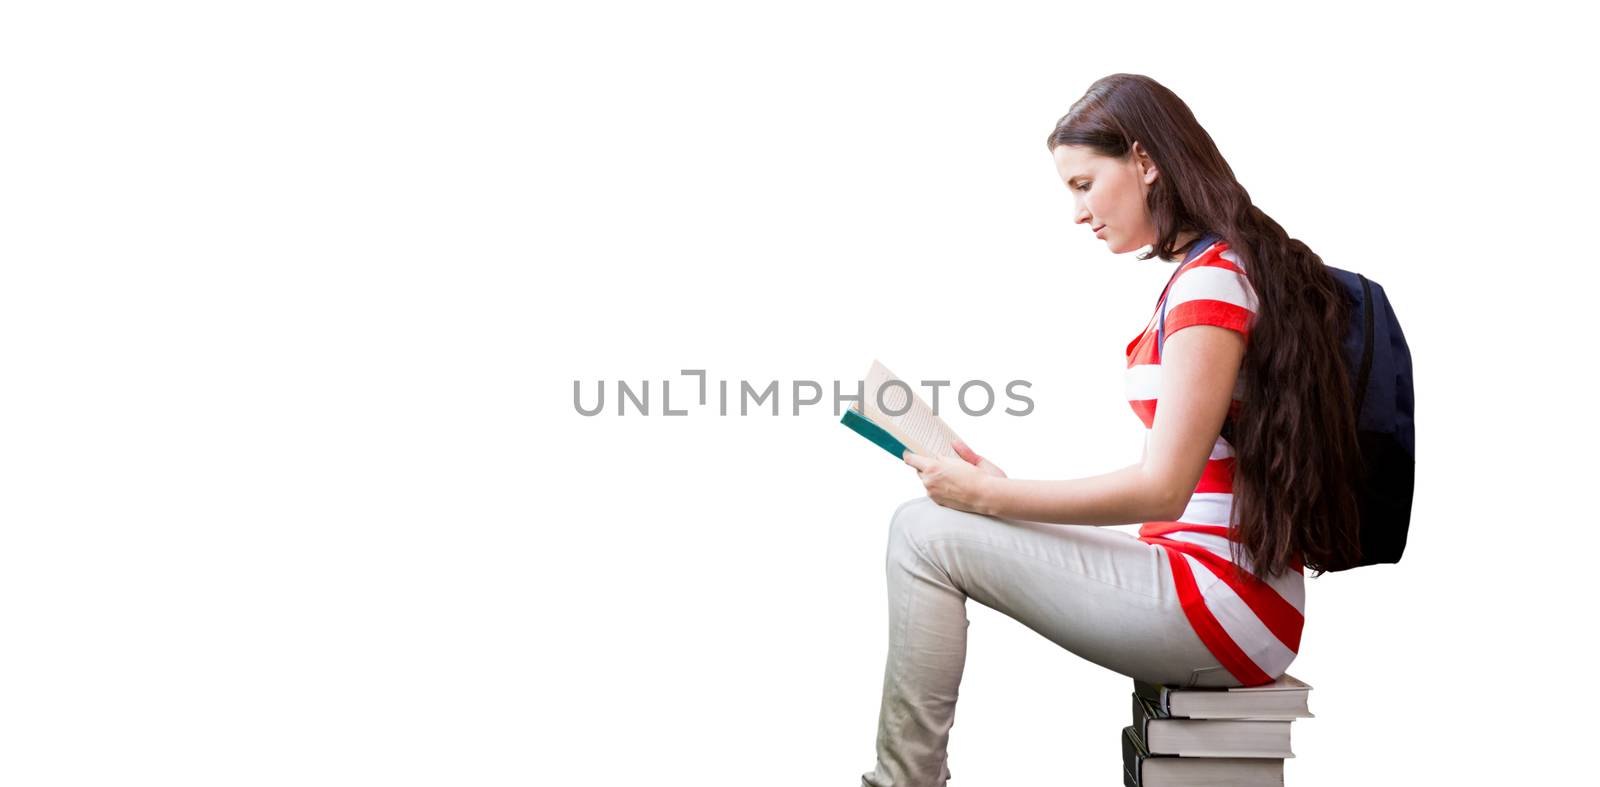 Composite image of student reading book in library by Wavebreakmedia